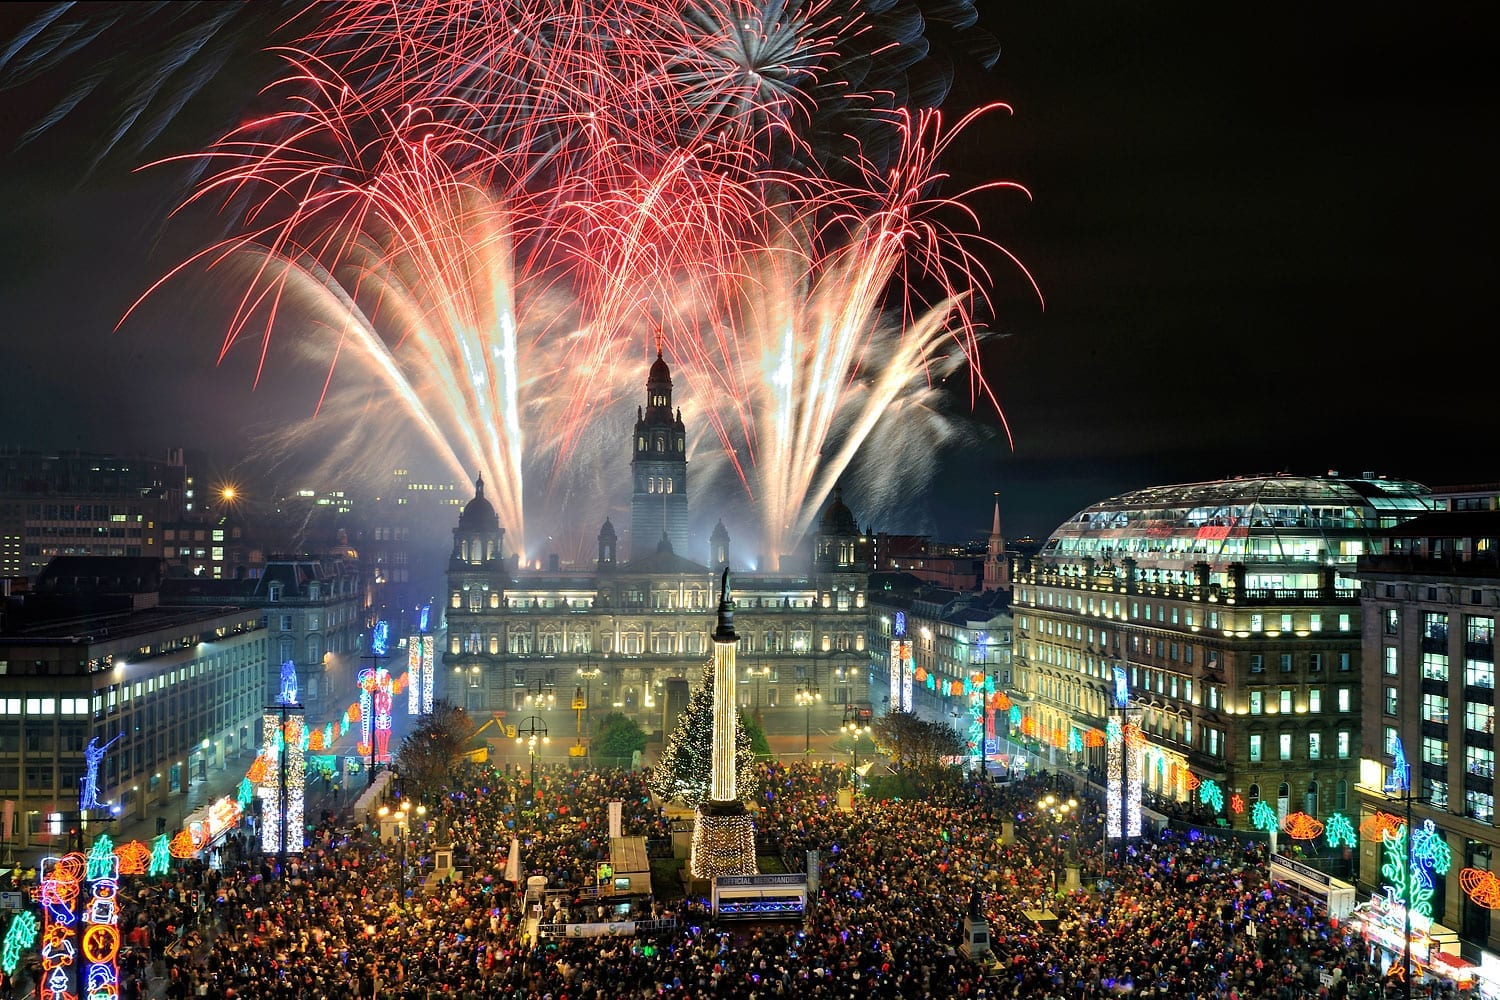 STOKE TRAVEL’S GUIDE TO HOGMANAY